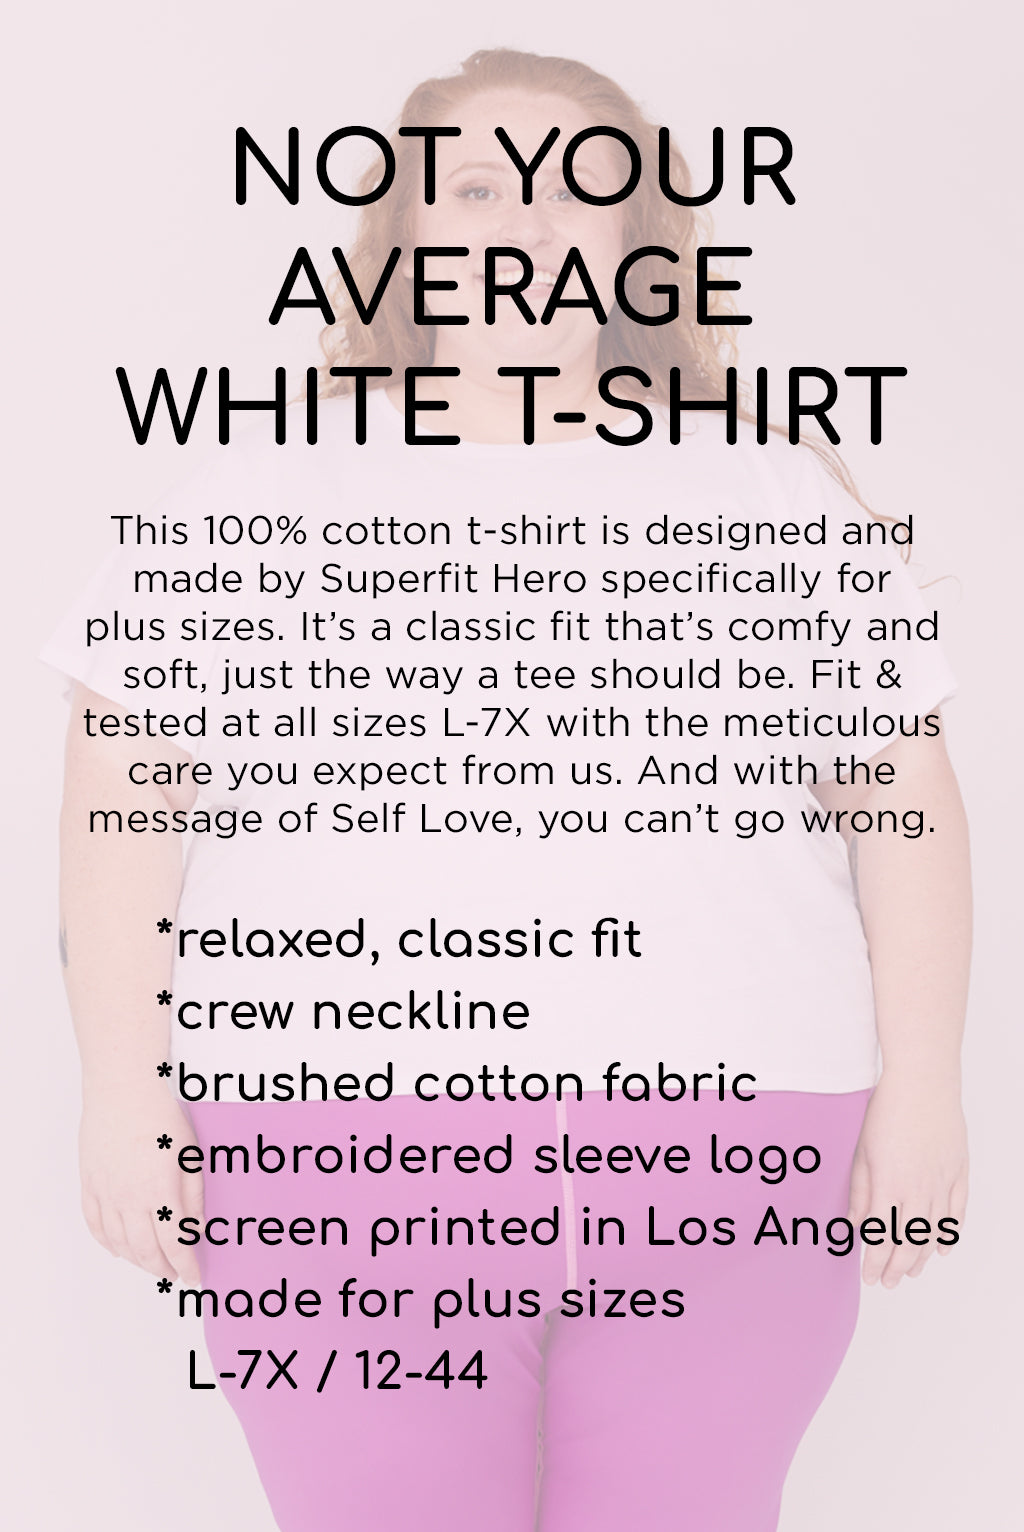 Not your average white t-shirt. This 100% cotton t-shirt is designed and made by Superfit Hero specifically for plus sizes. It's a classic fit that's comfy and soft, just the way a tee should be. Fit & tested at all sizes L-7X with the meticulous care you expect from us. And with the message of Self Love, you can't go wrong.